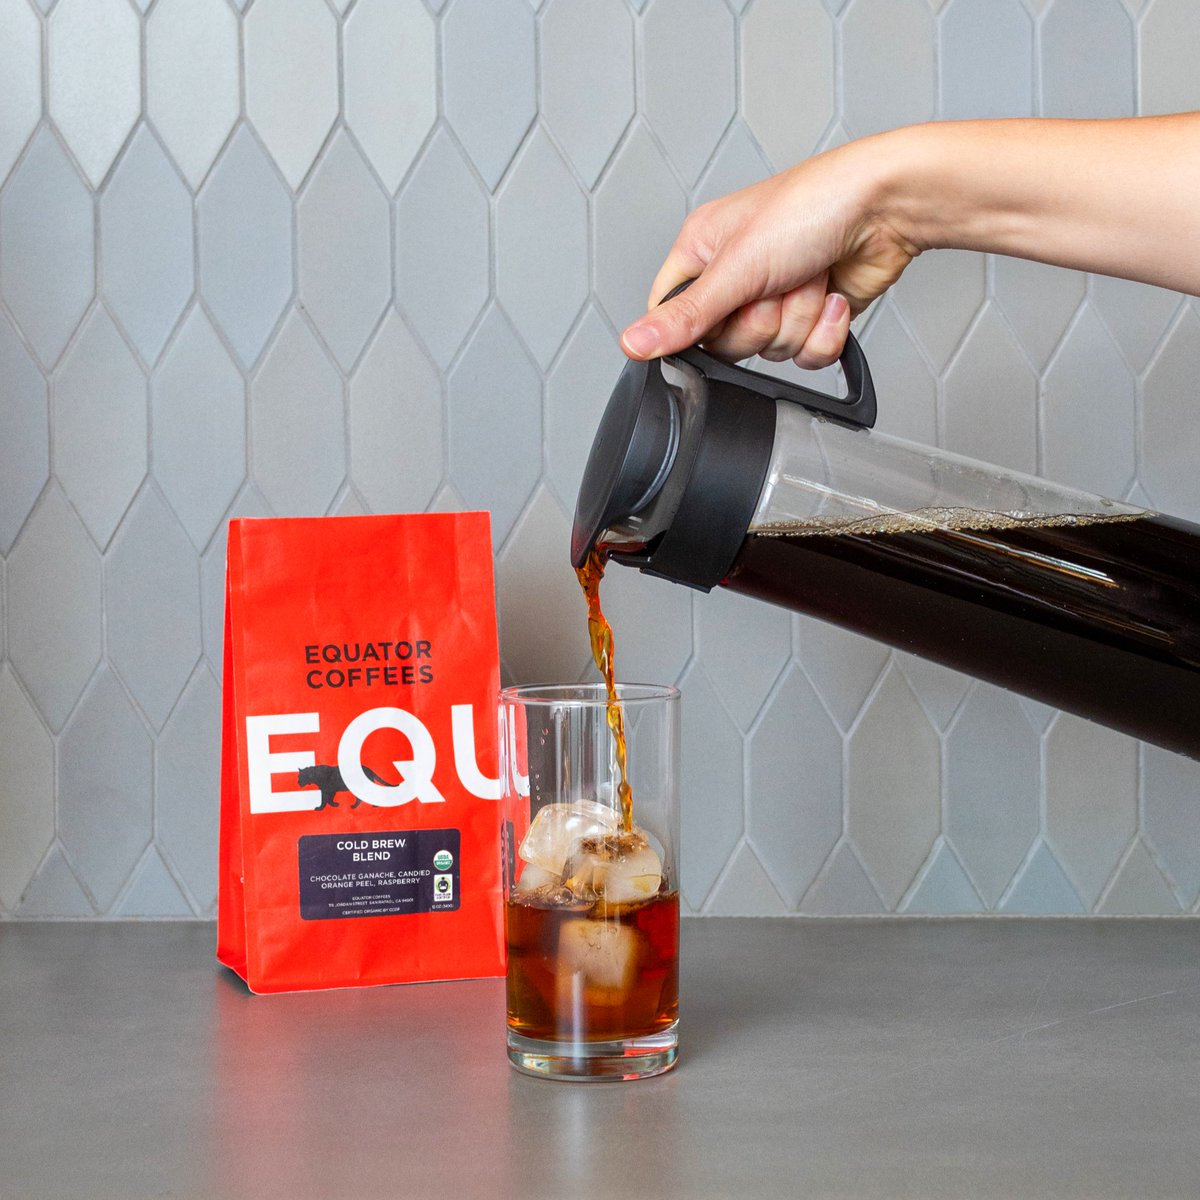 Brew delicious cold brew daily🧊☕ Enjoy the rich flavors of creamy chocolate ganache, maple syrup, and candied orange peel without leaving the house when you brew Equator Cold Brew Blend at home. 🛒 bit.ly/3L6ACWX